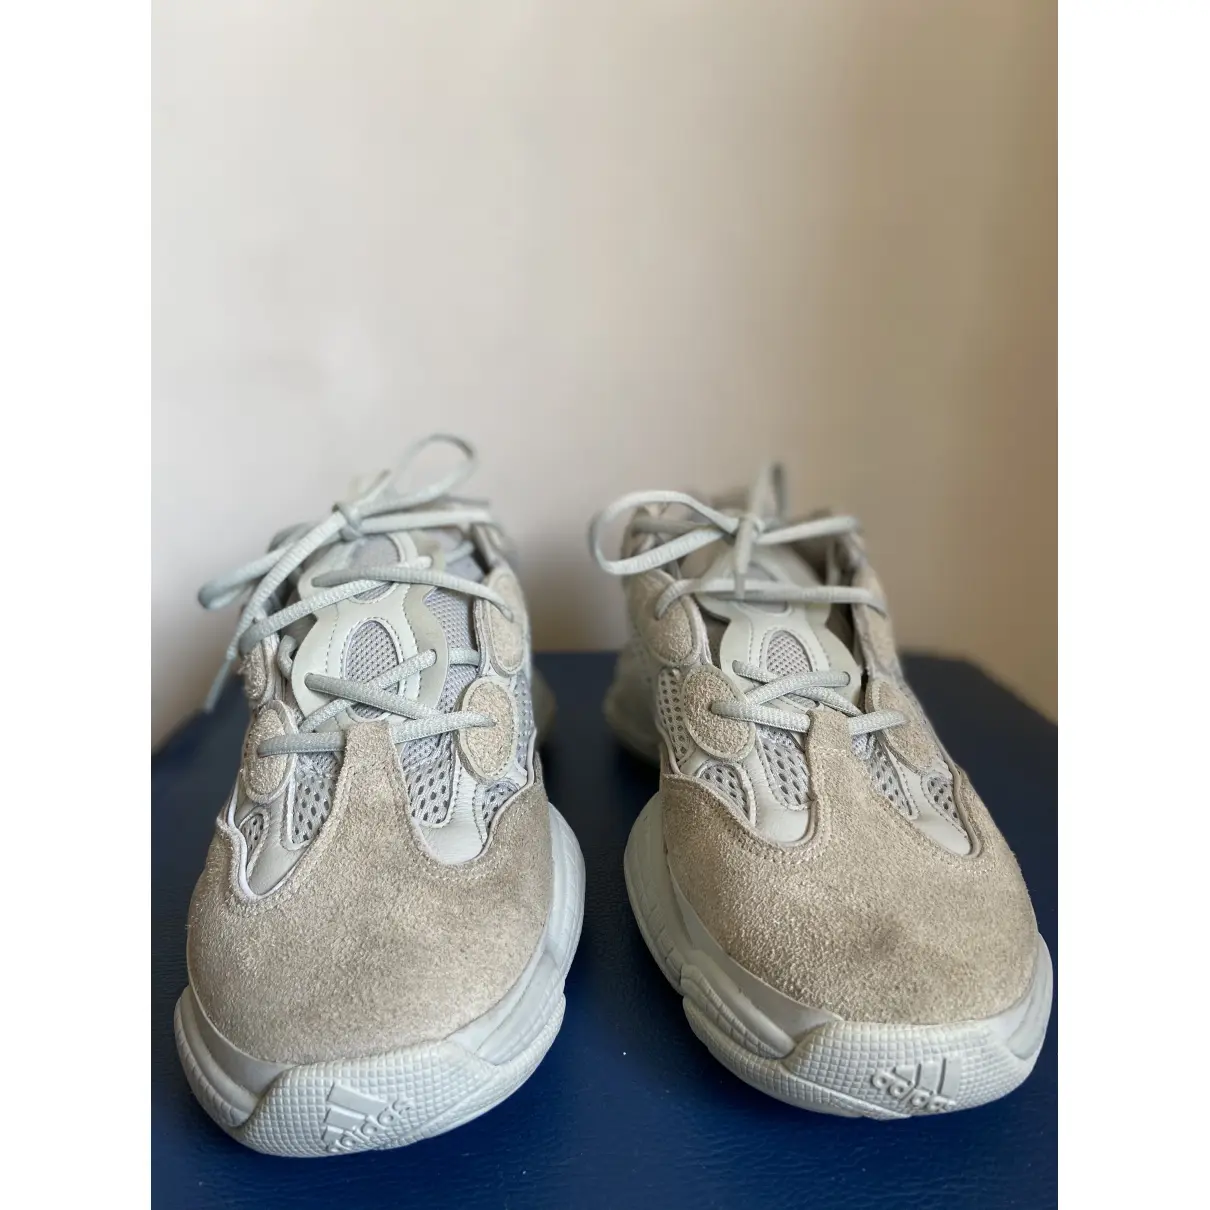 Yeezy x Adidas 500 cloth low trainers for sale